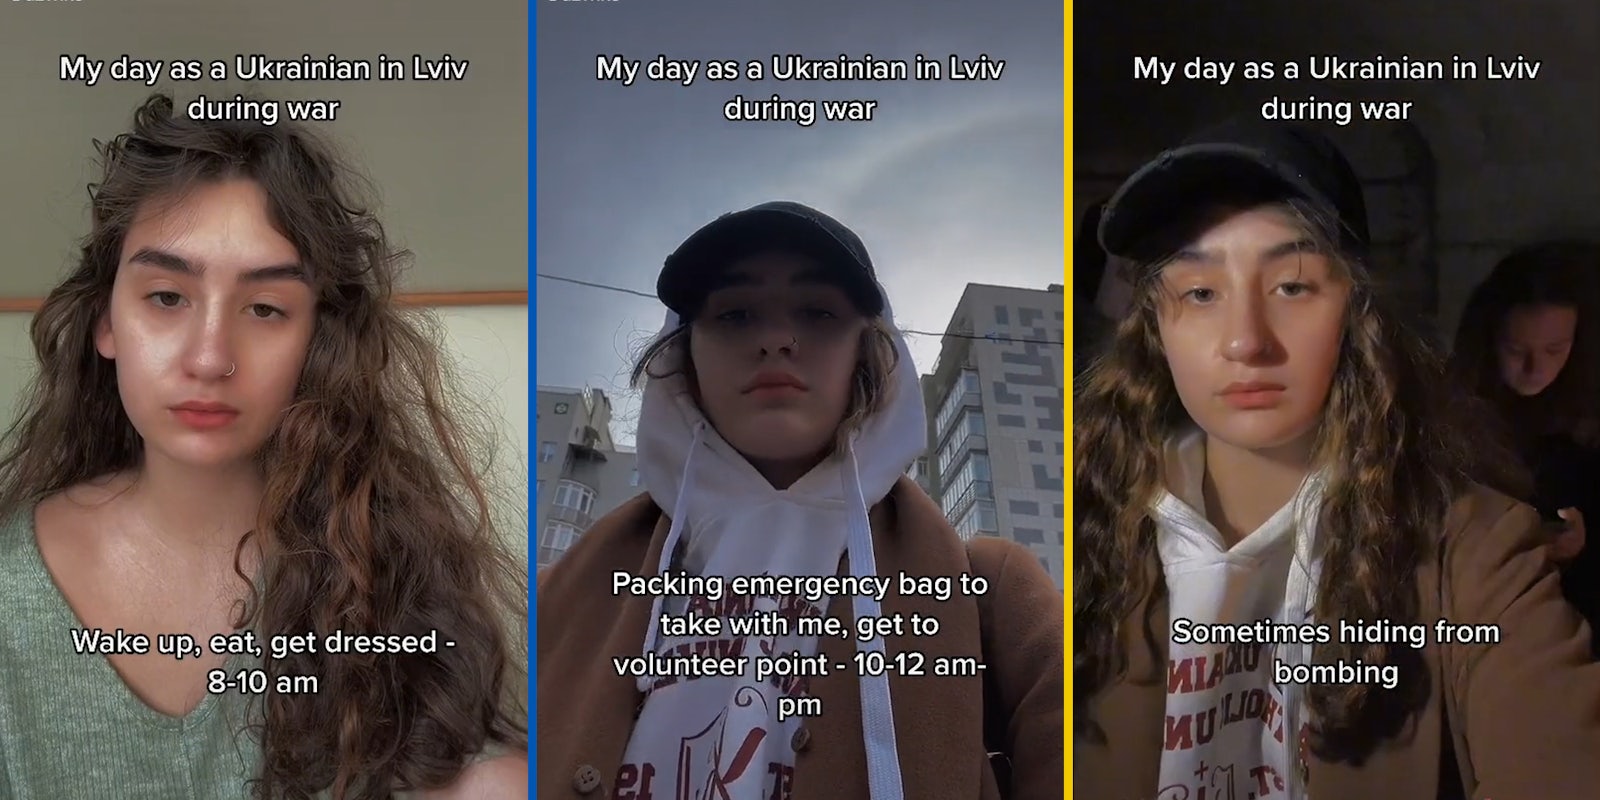 young woman with captions 'my day as a Ukrainian in Lviv during war', 'wake up, eat, get dressed 8-10 am' (l) 'packing emergency bag to take with me, get to volunteer point - 10-12 am-pm' (c) 'sometimes hiding from bombing' (r)